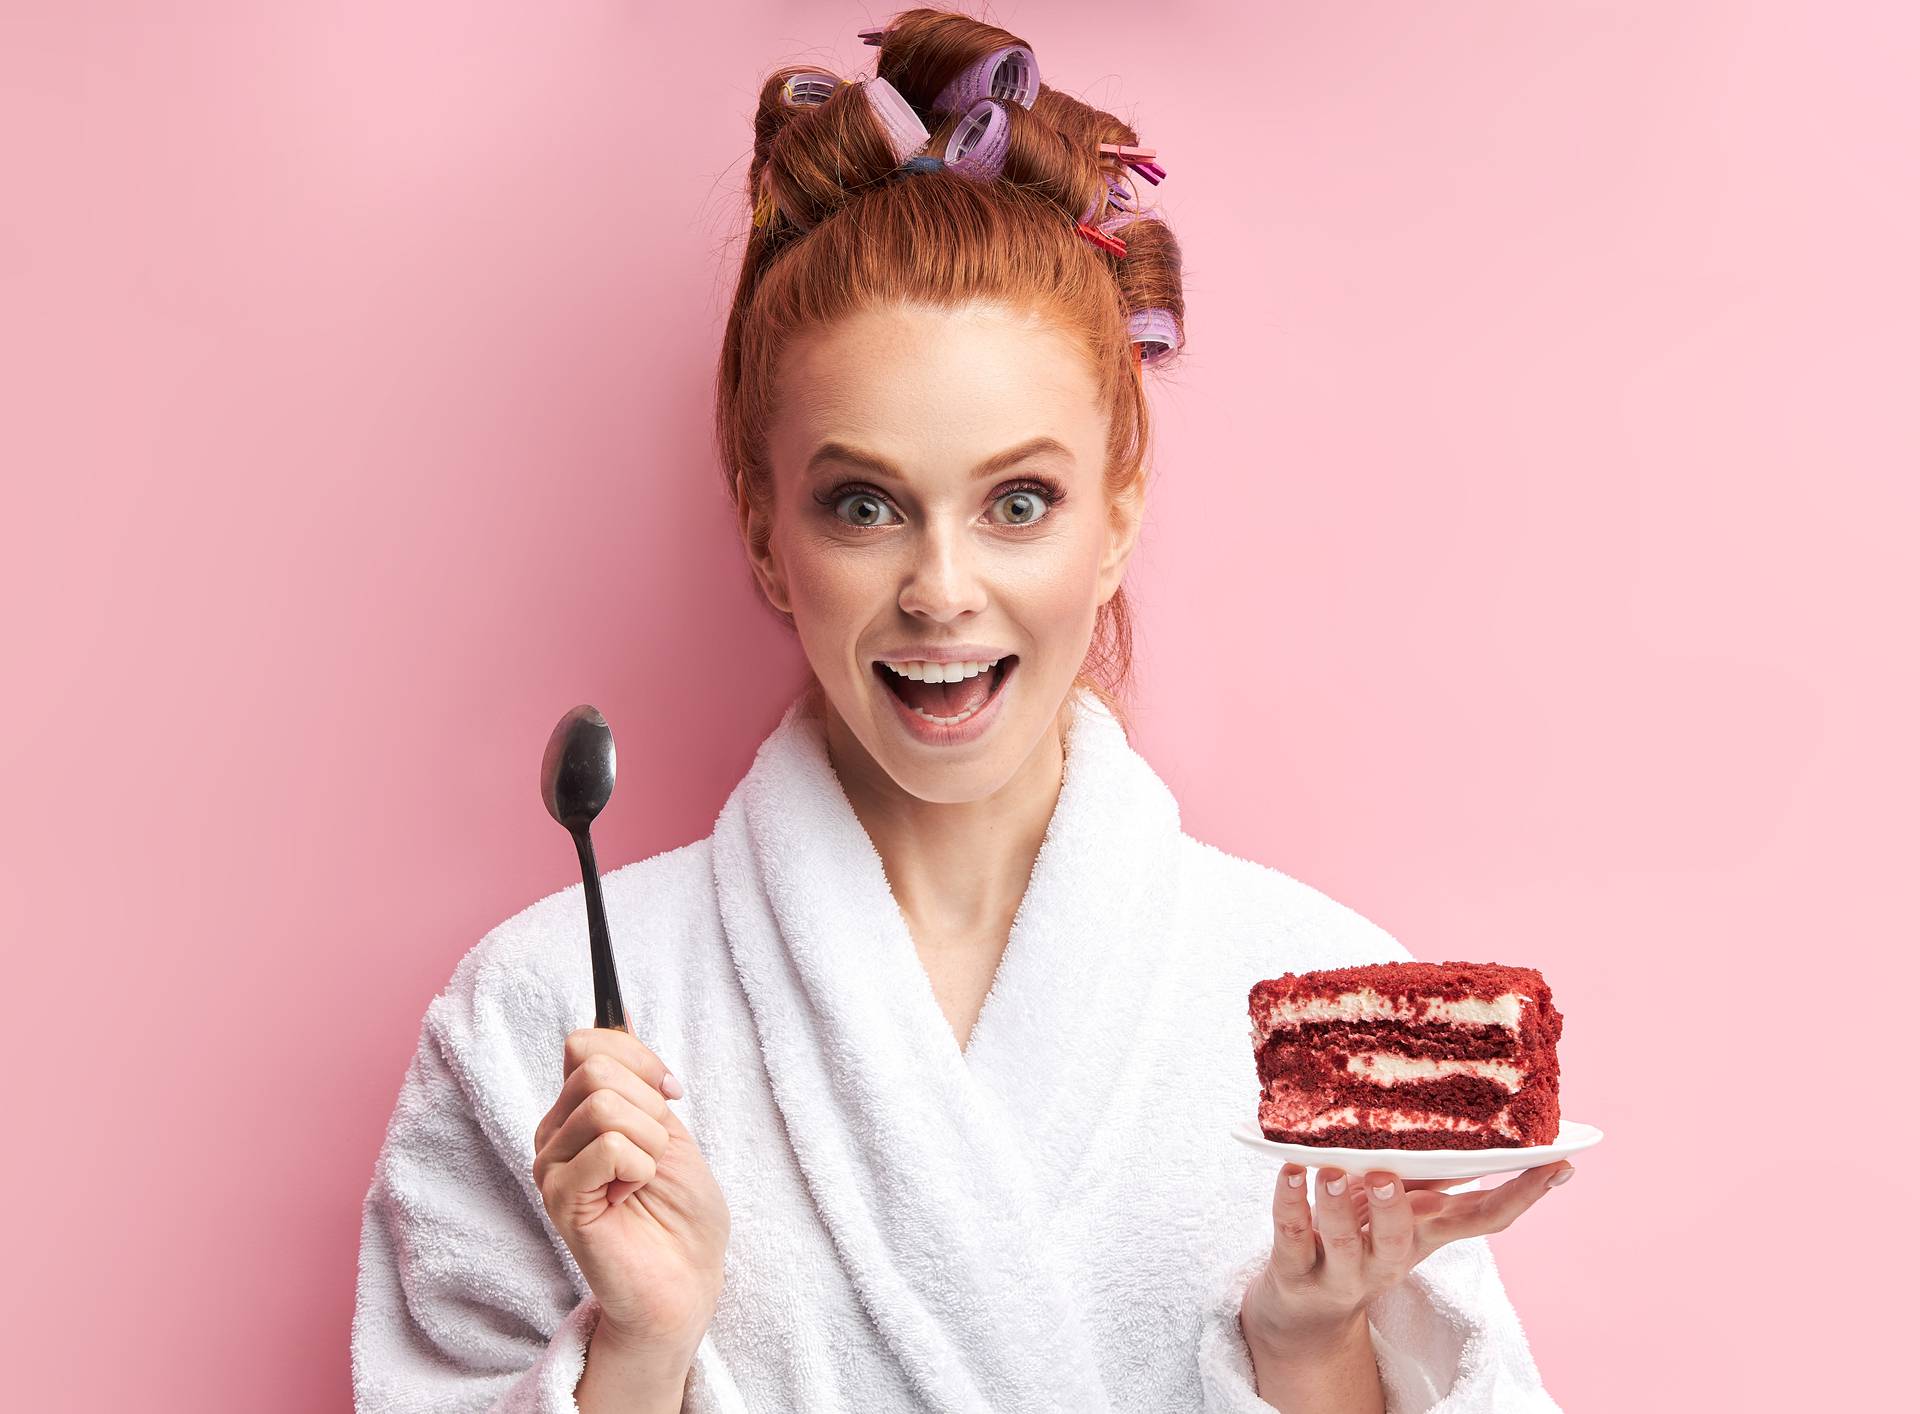 Happy young woman going to eat tasty cake on pink background